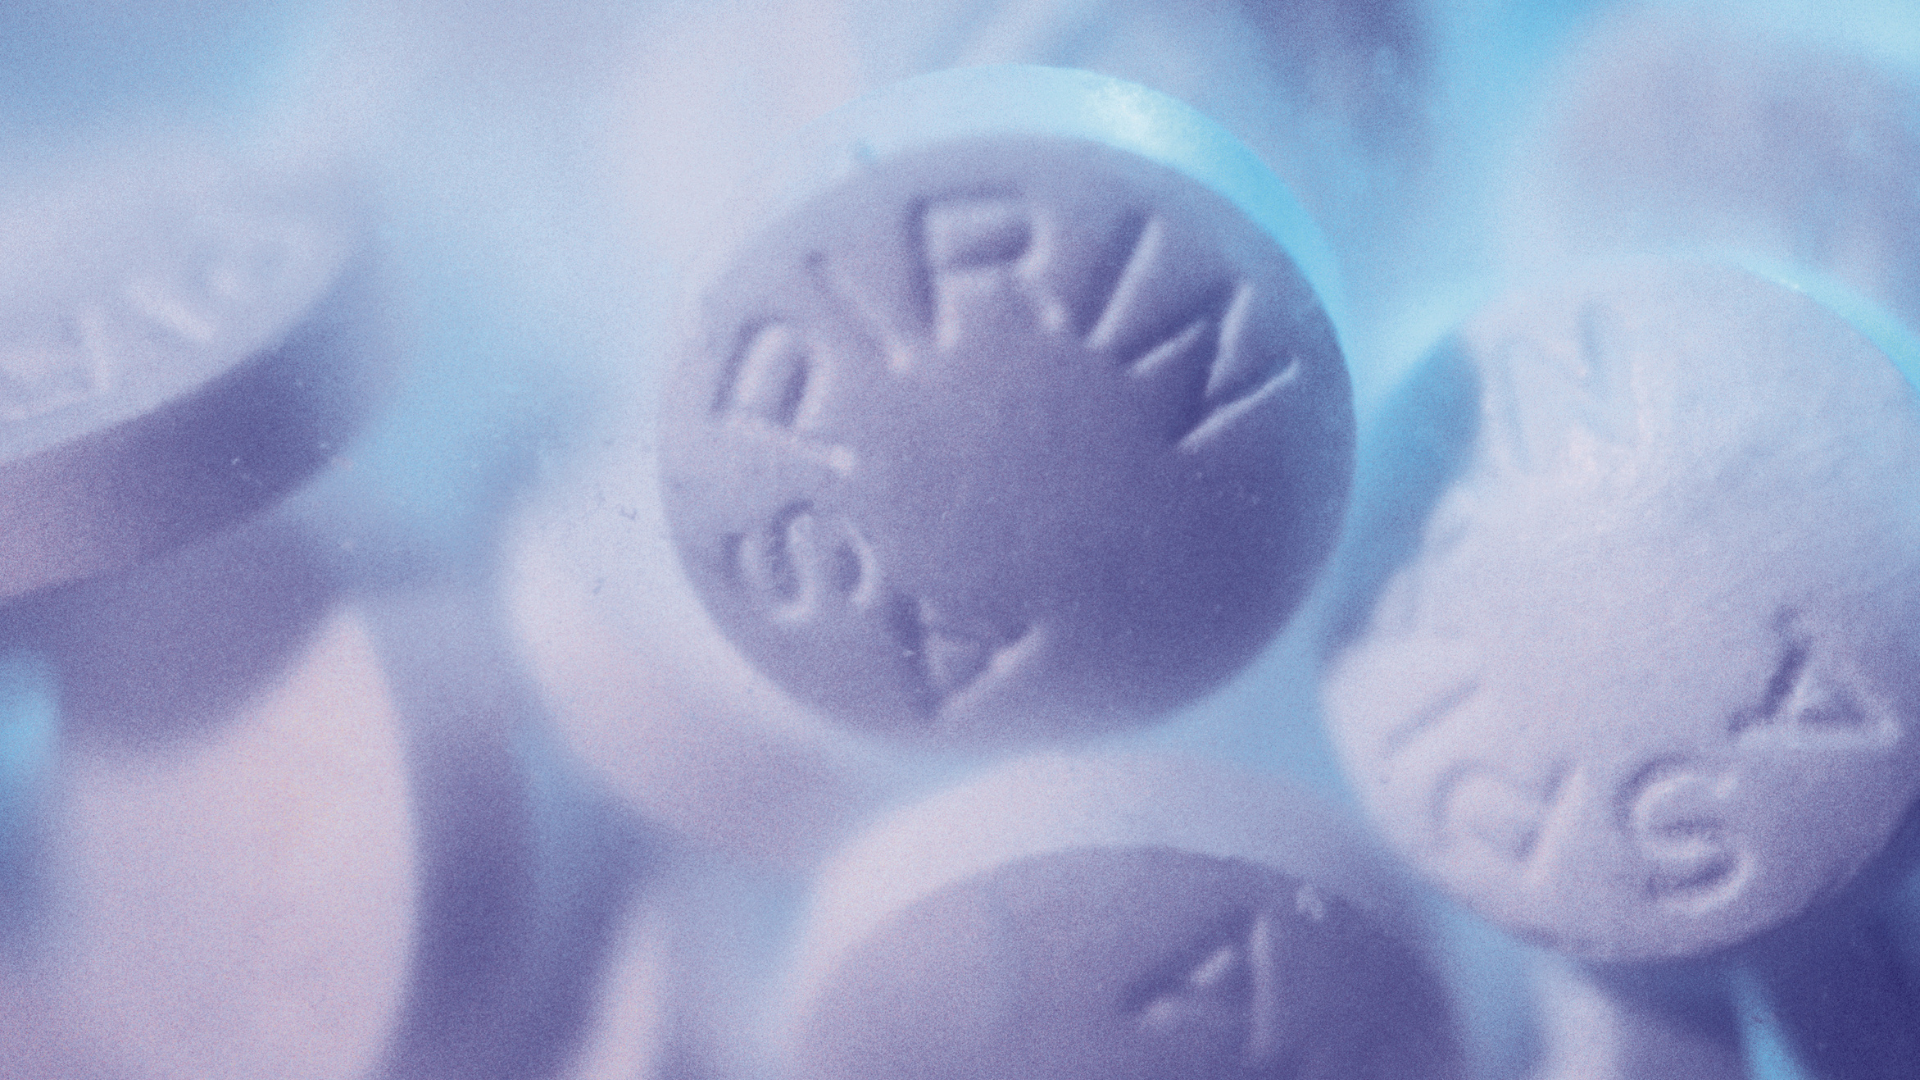 Aspirin Looks Good for Thromboprophylaxis Even in Patients With Risk Factors for Clotting